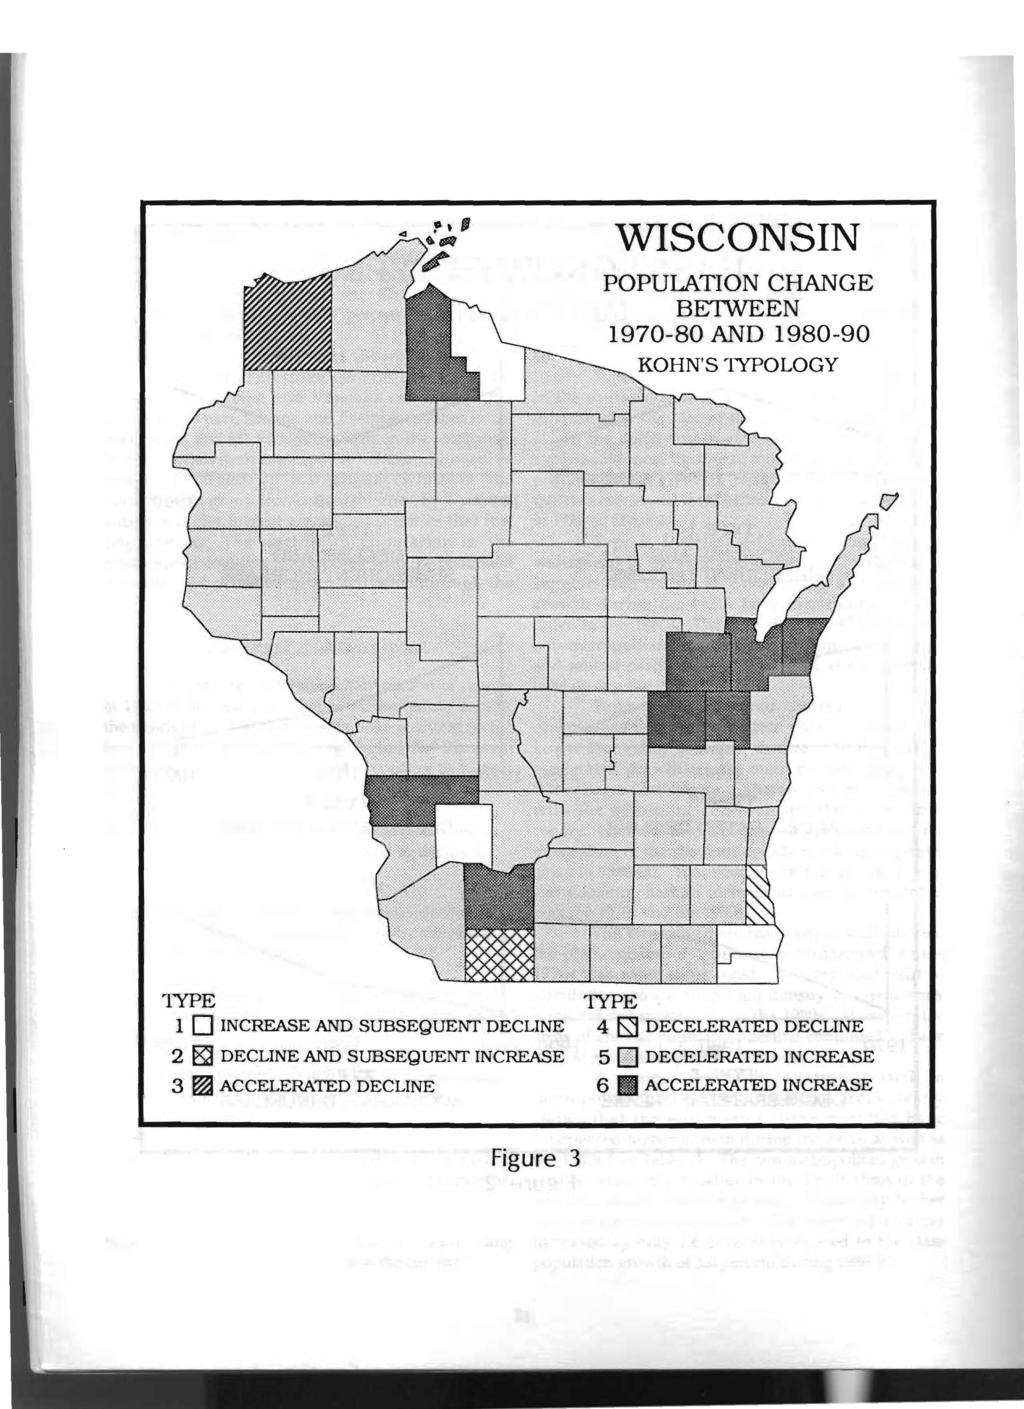 WISCONSIN POPULATION CHANGE BE1WEEN 1970-80 AND 1980-90 TYPE 1 0 INCREASE AND SUBSEQUENT DECLINE 2 ~ DECLINE AND